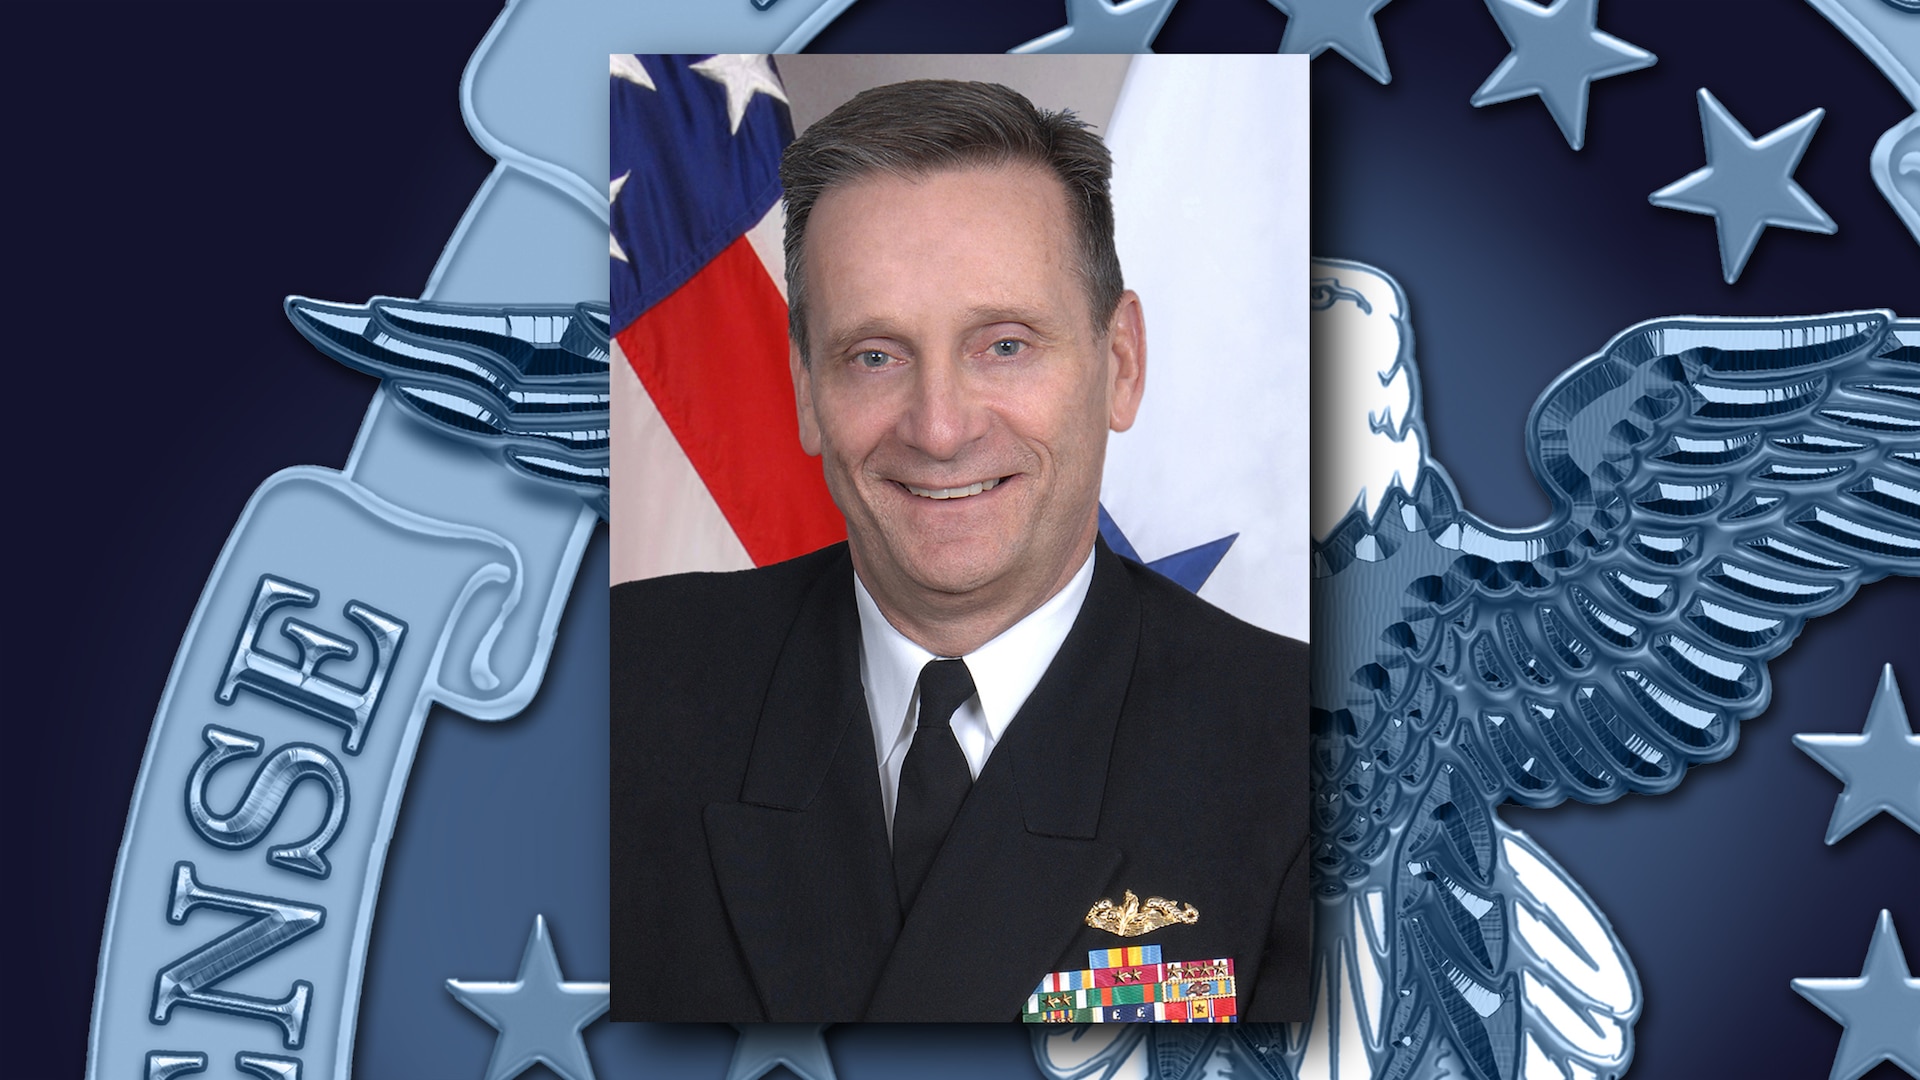 Retired Navy Vice Admiral Mark Harnitchek will be inducted into the DLA Hall of Fame July 25. He was the agency’s director from November 2011 to December 2014, one of the busiest periods in military history.